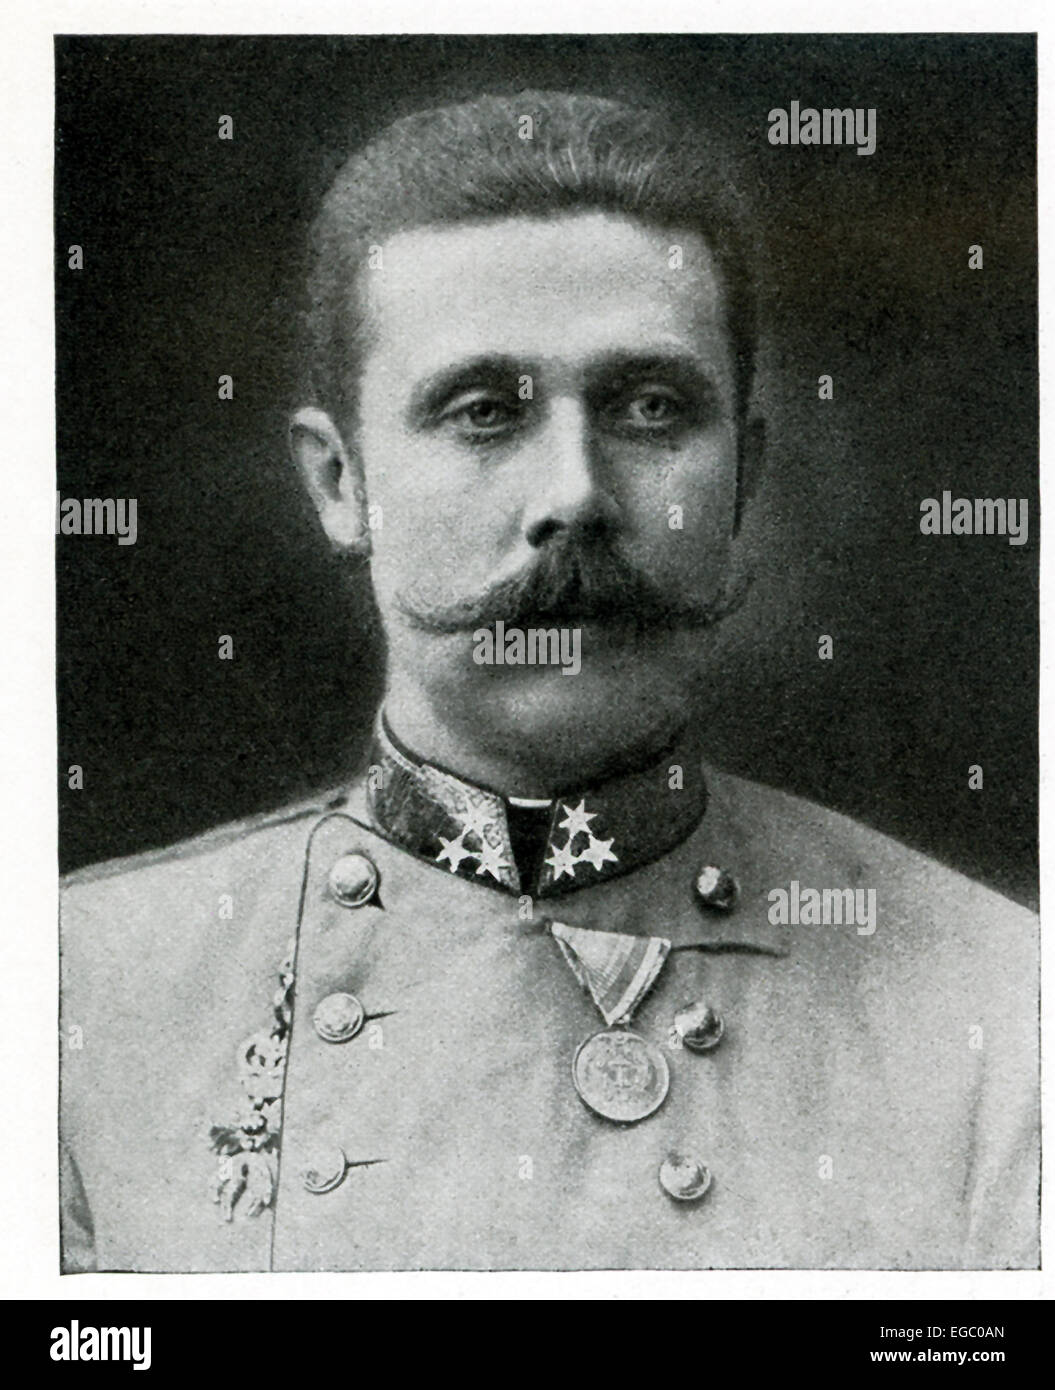 This photo shows the Archduke Francis Ferdinand, heir apparent to the throne of Austria-Hungary. It was his murder,along with his wife Princess Sophie, on June 28, 1914, in Sarajevo that was the starting point of World War I. Stock Photo